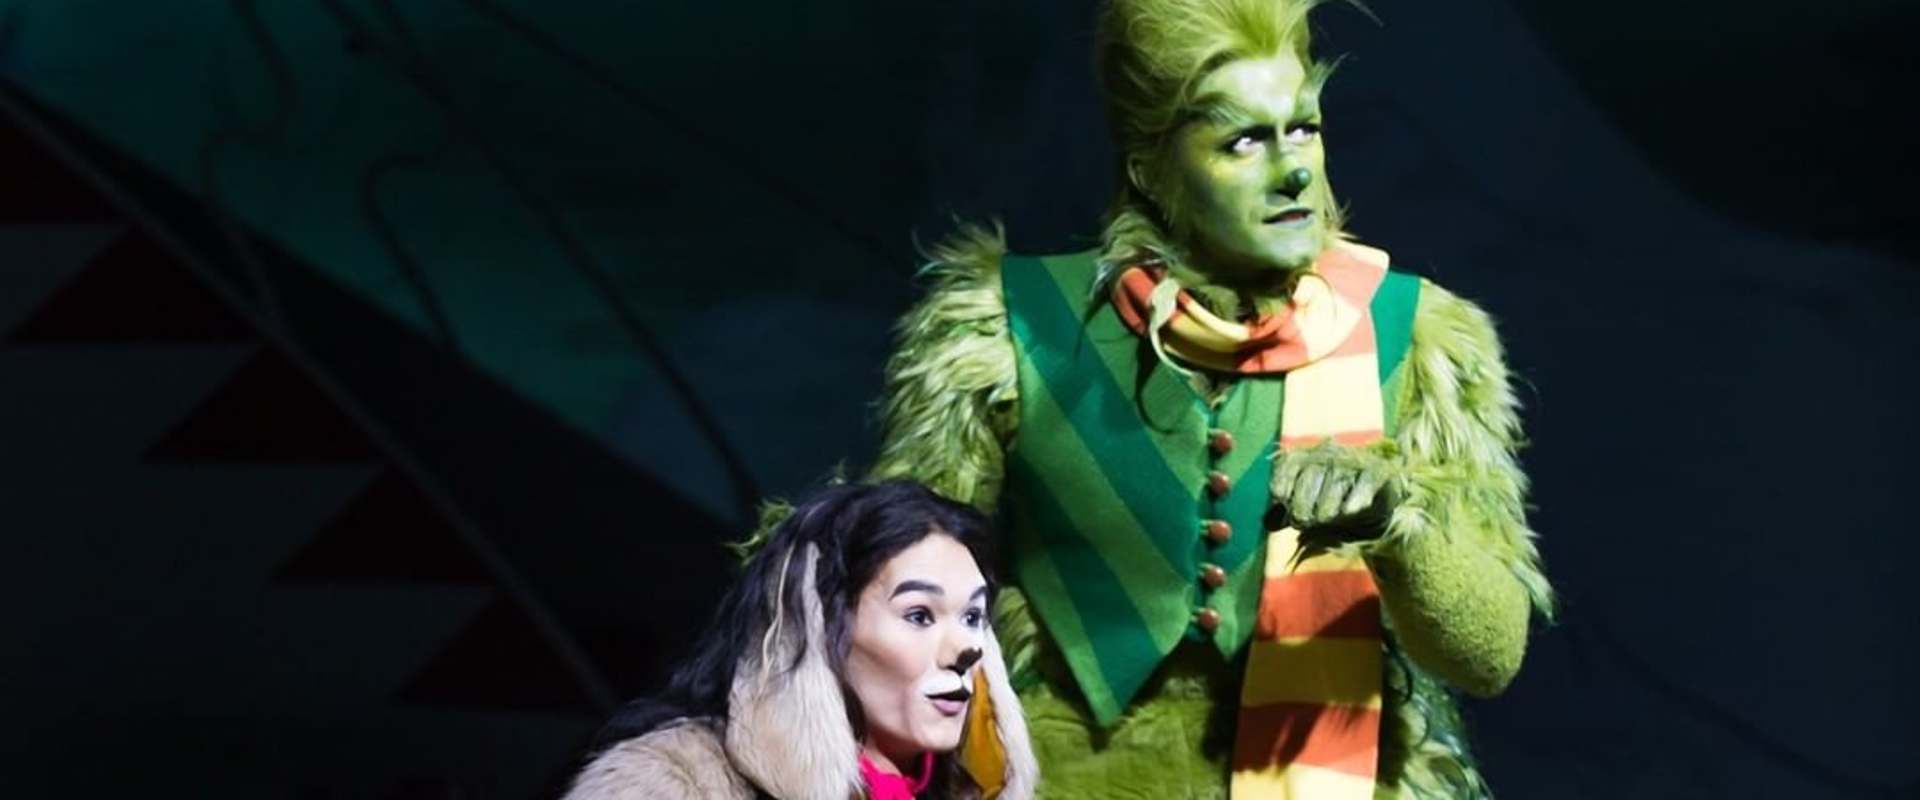 Dr. Seuss' The Grinch Musical background 2